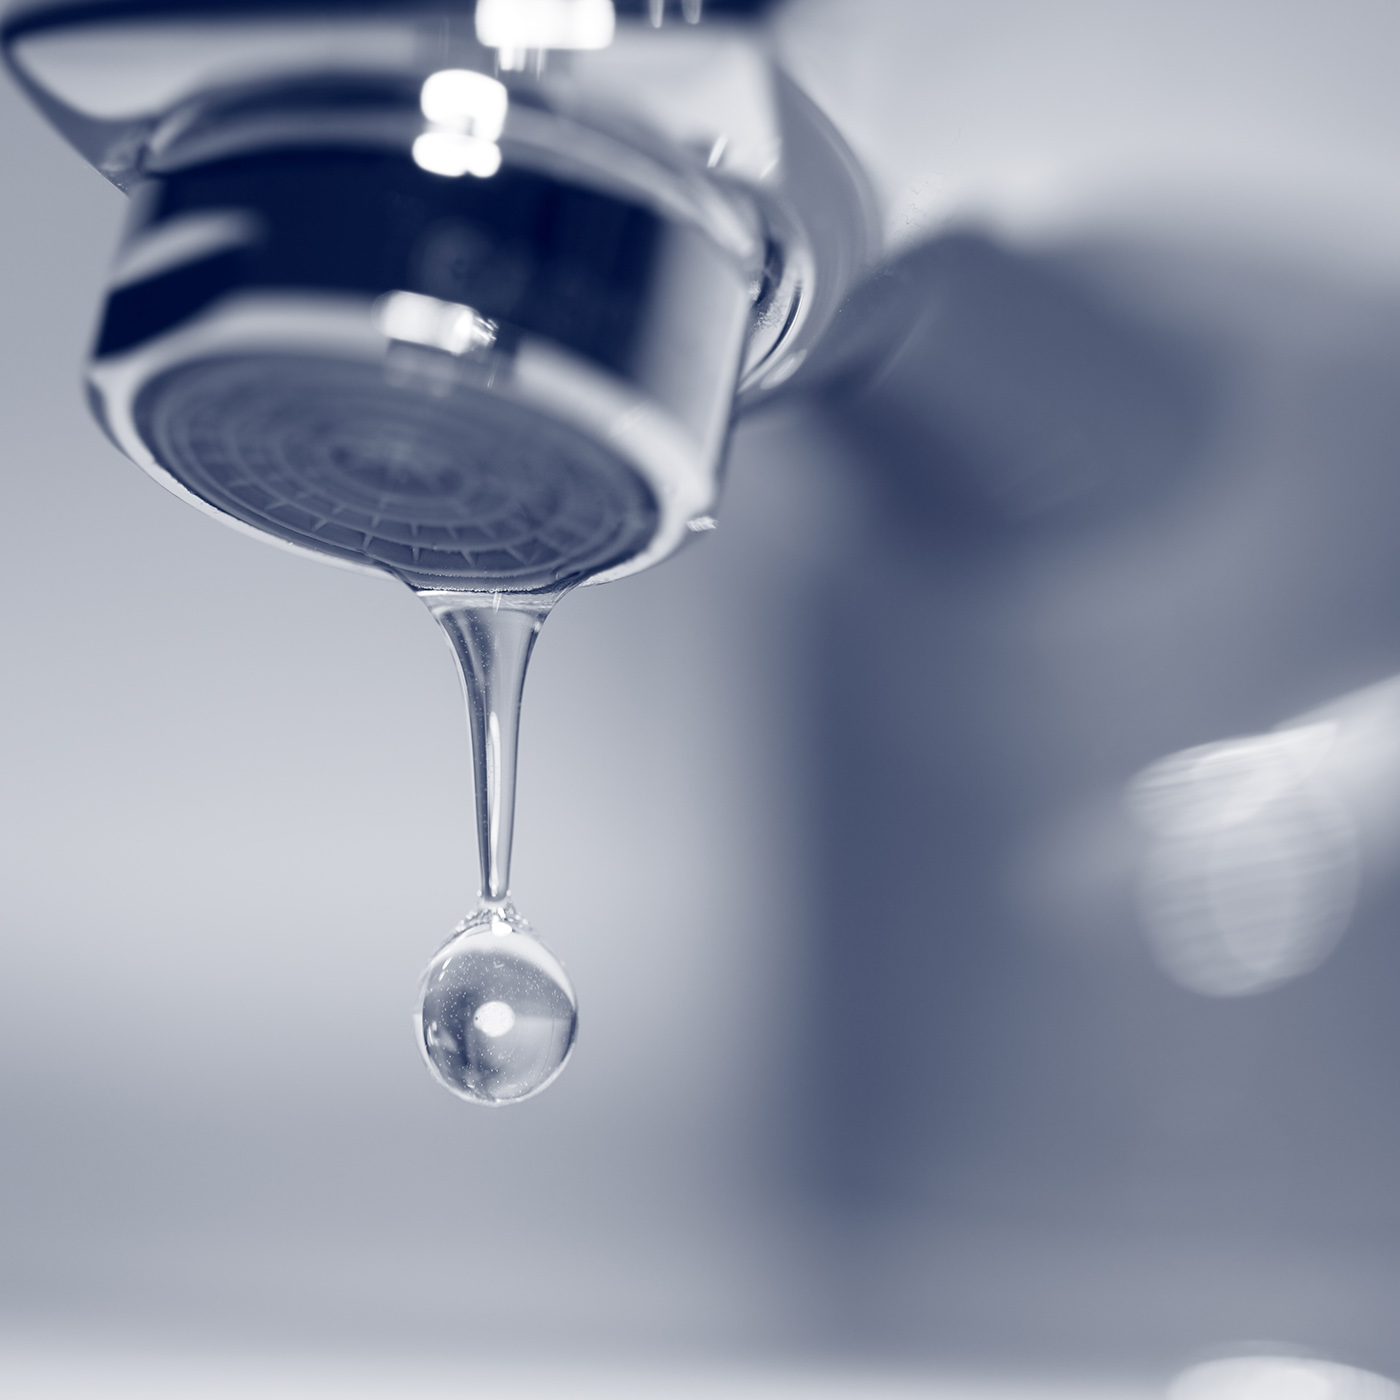 How to stop a dripping tap caused by a faulty washer